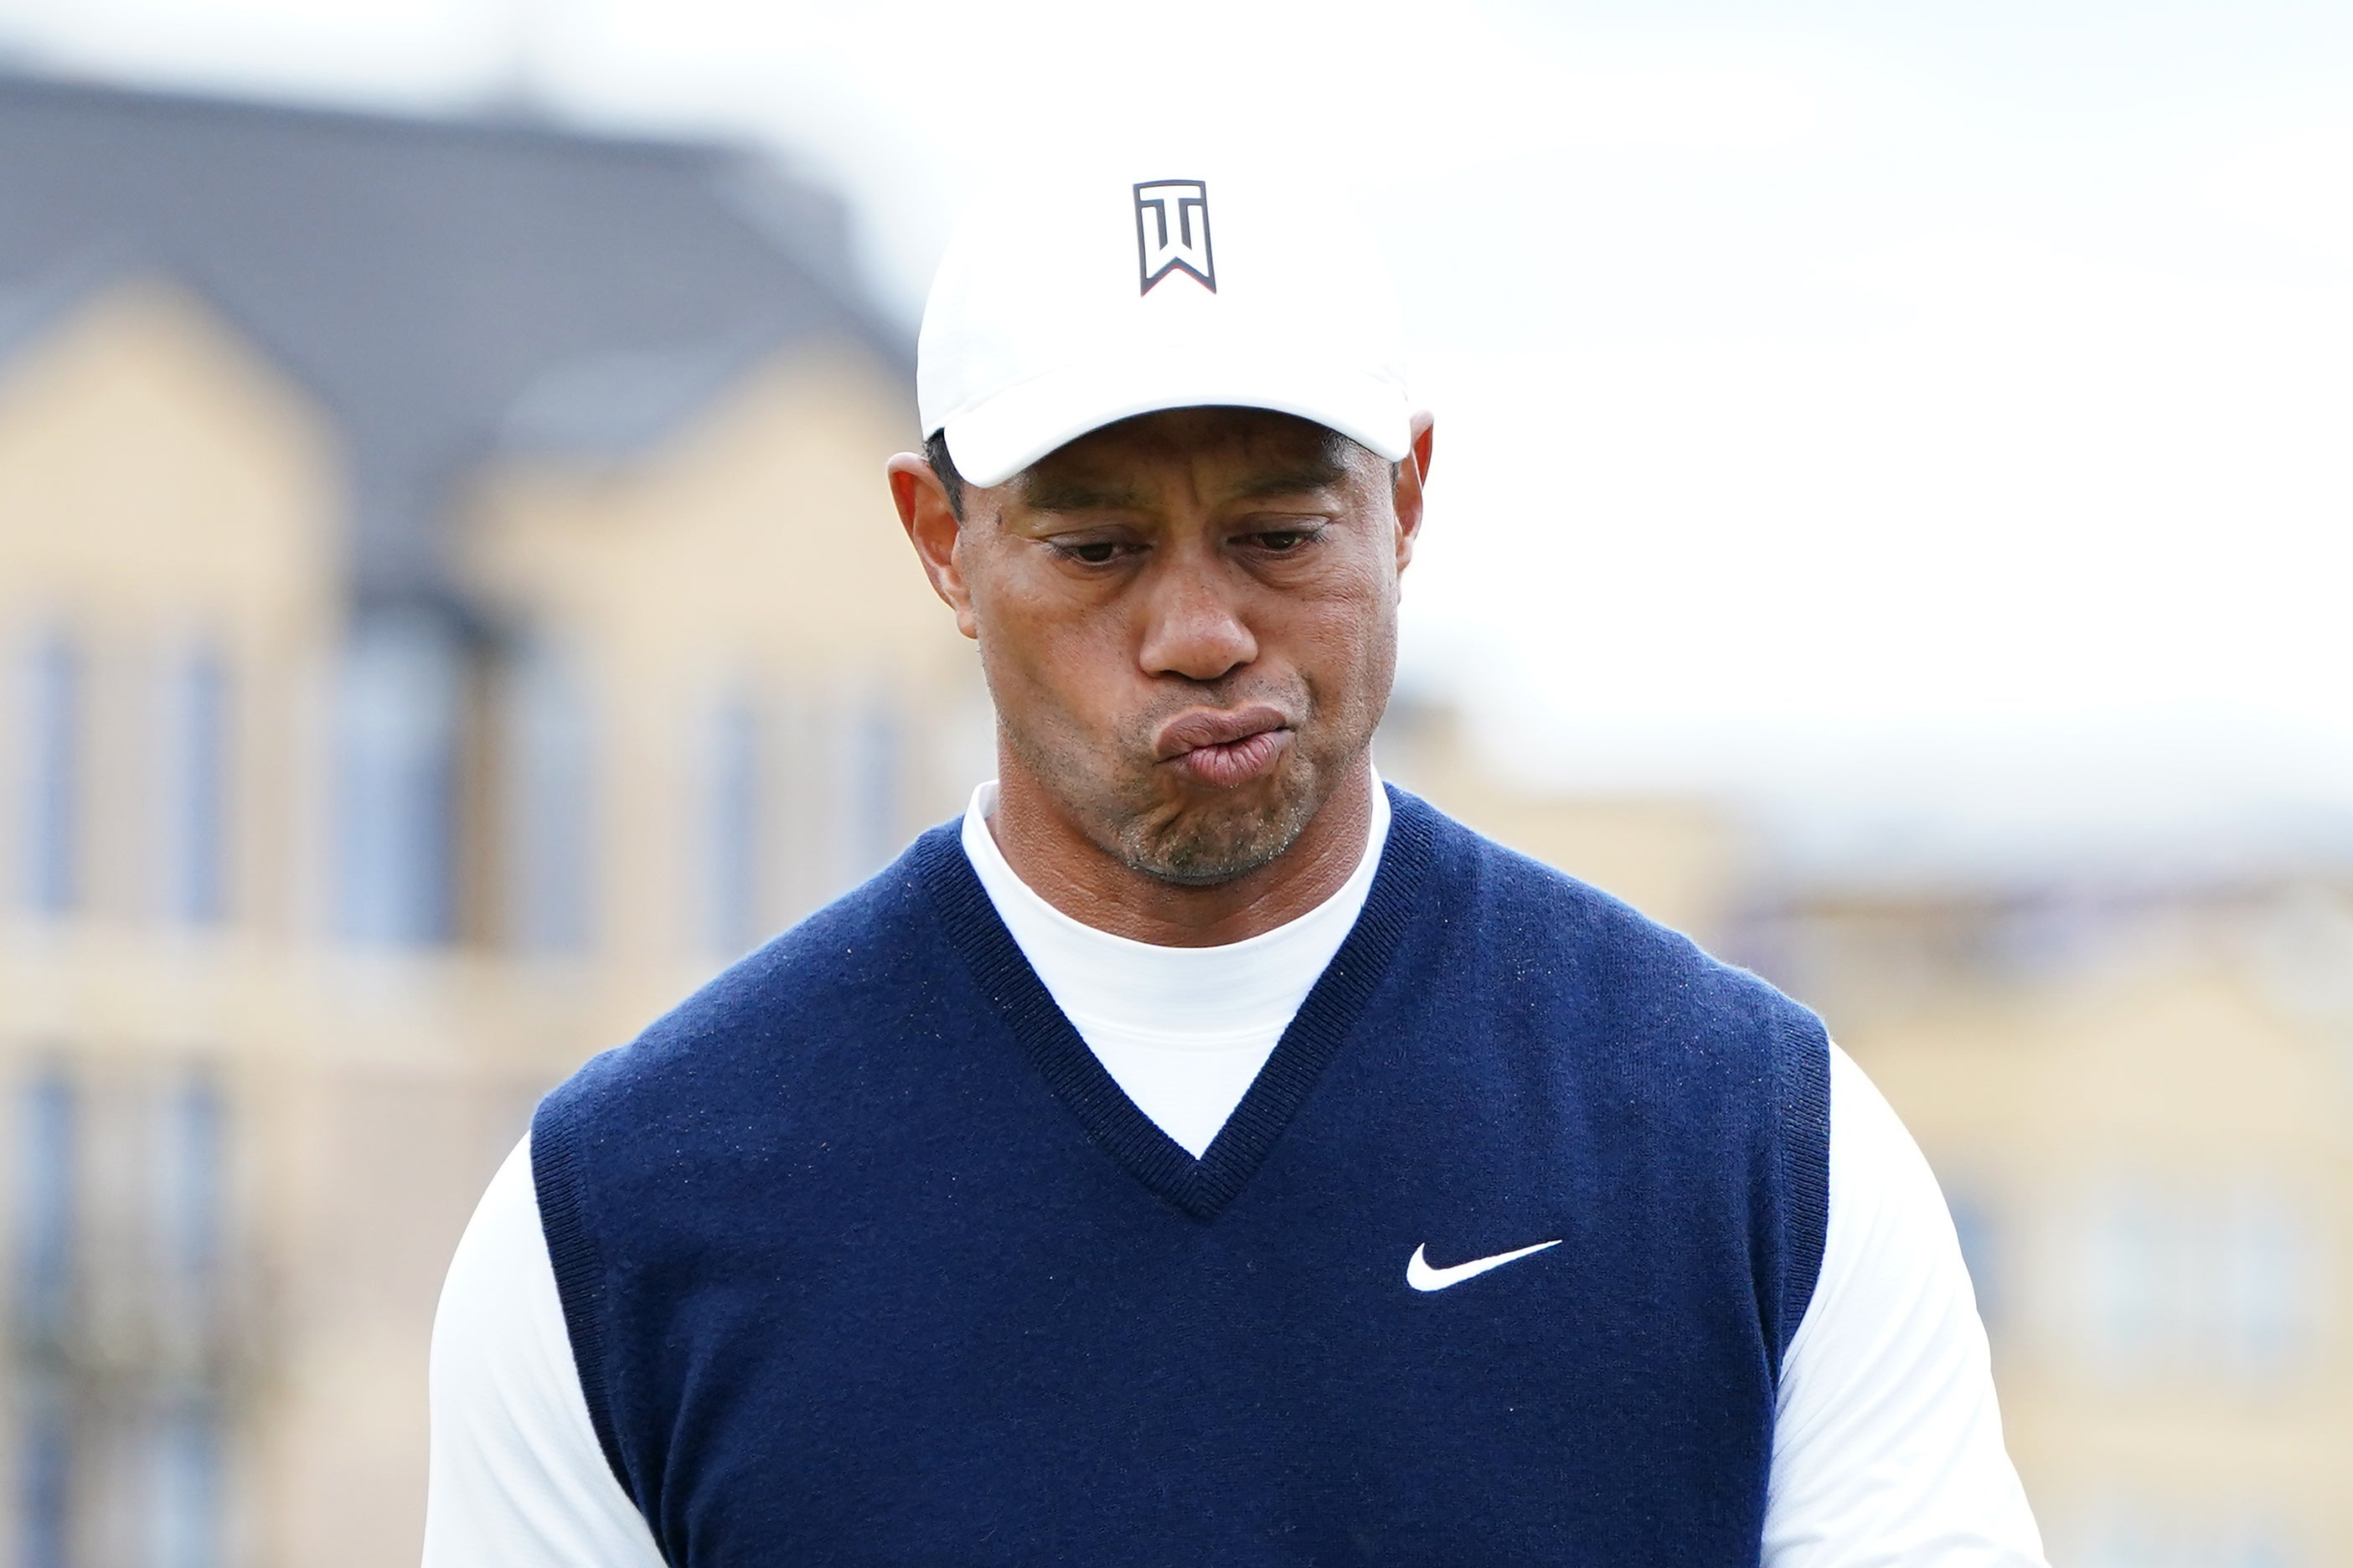 Tiger Woods looks frustrated as he makes his way to the second tee after a double bogey on the 1st